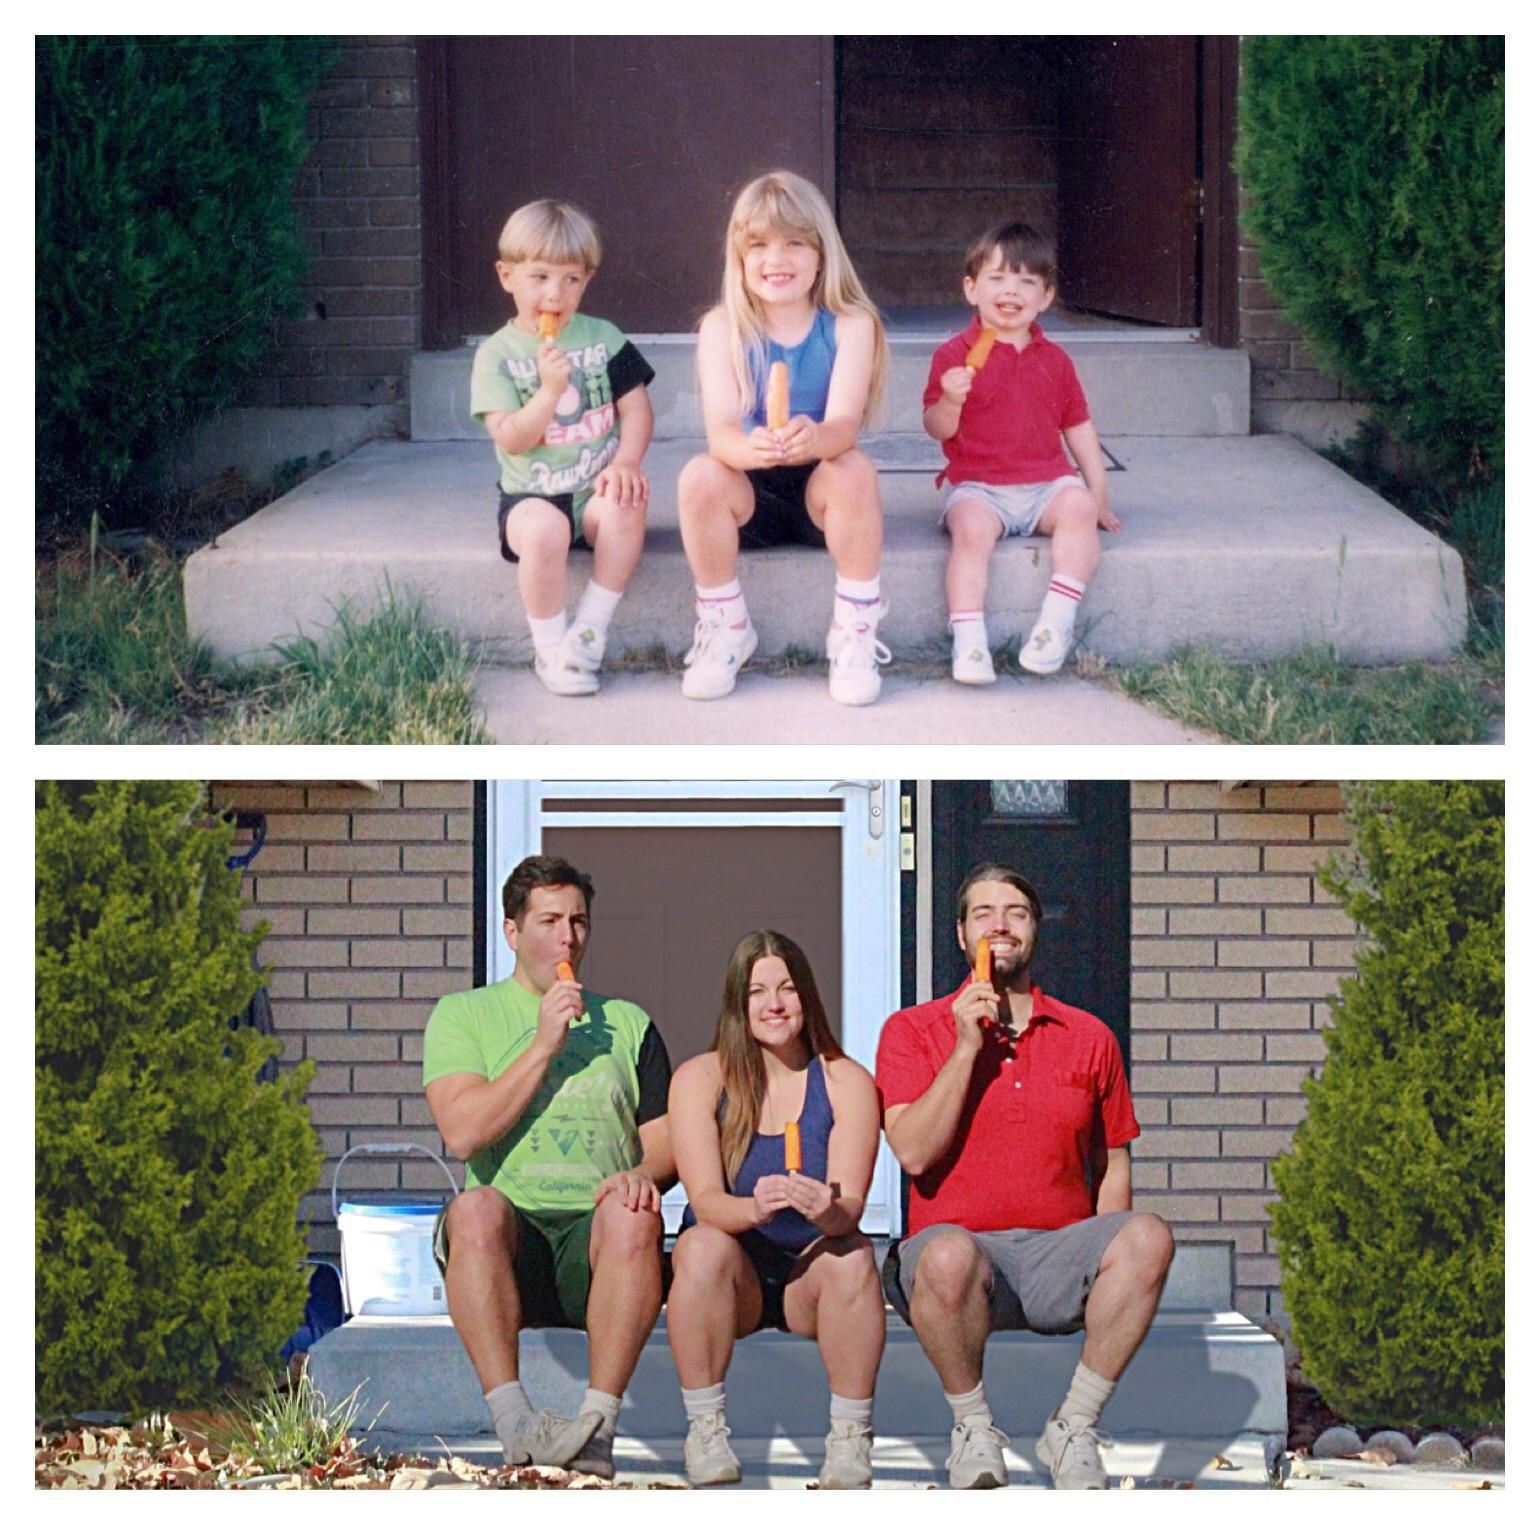 My siblings and I recreated this photo from our youth. Circa 91